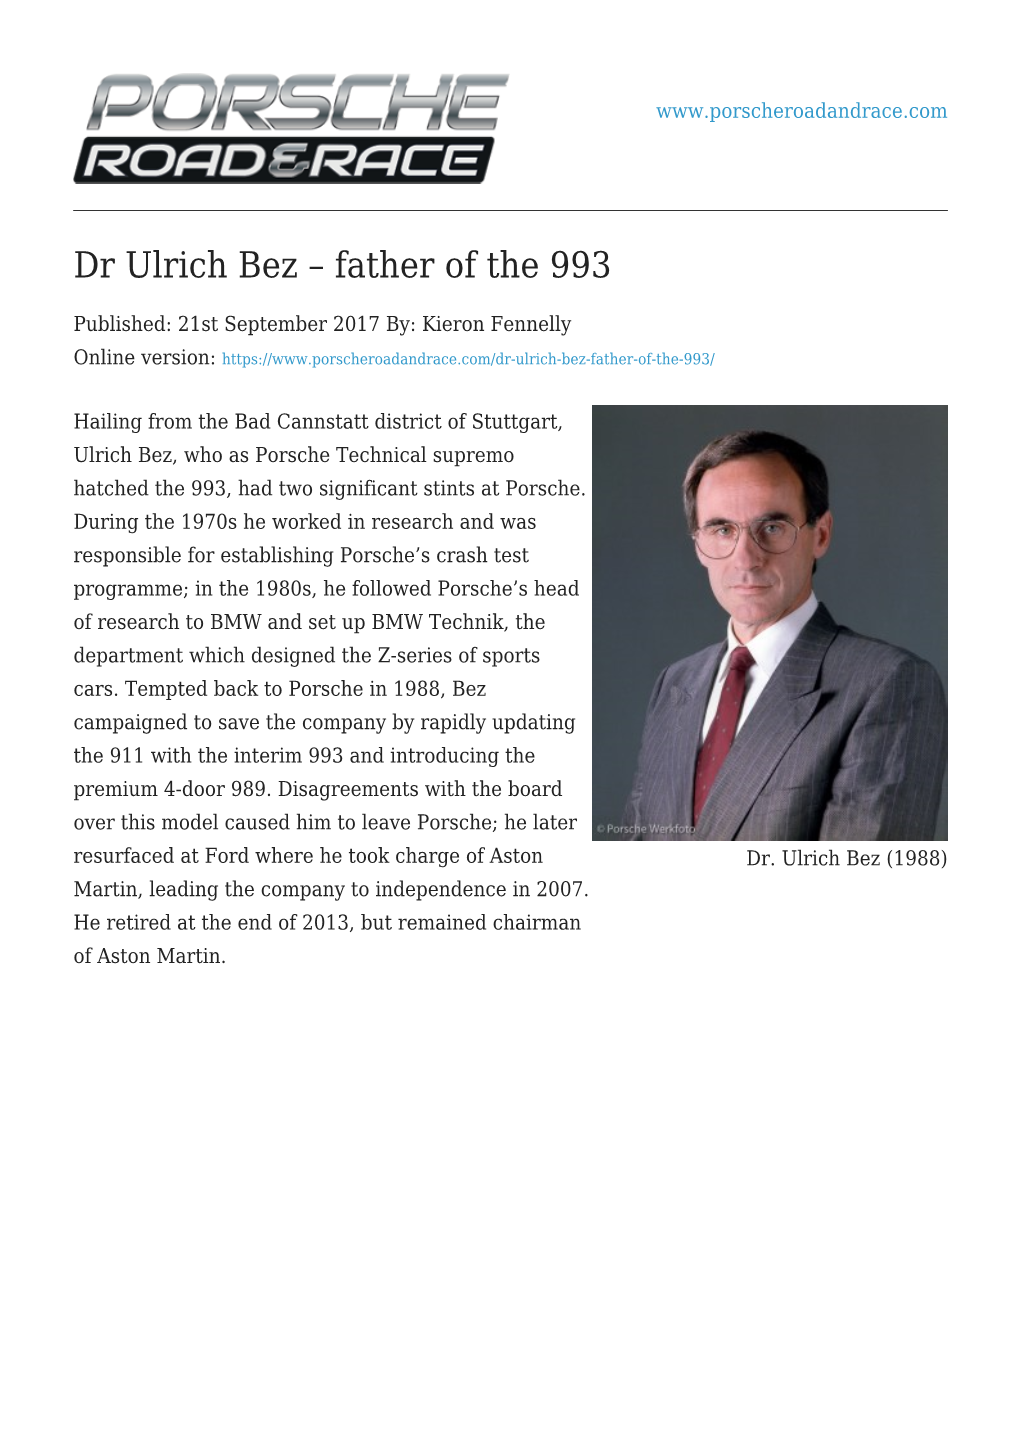 Dr Ulrich Bez – Father of the 993